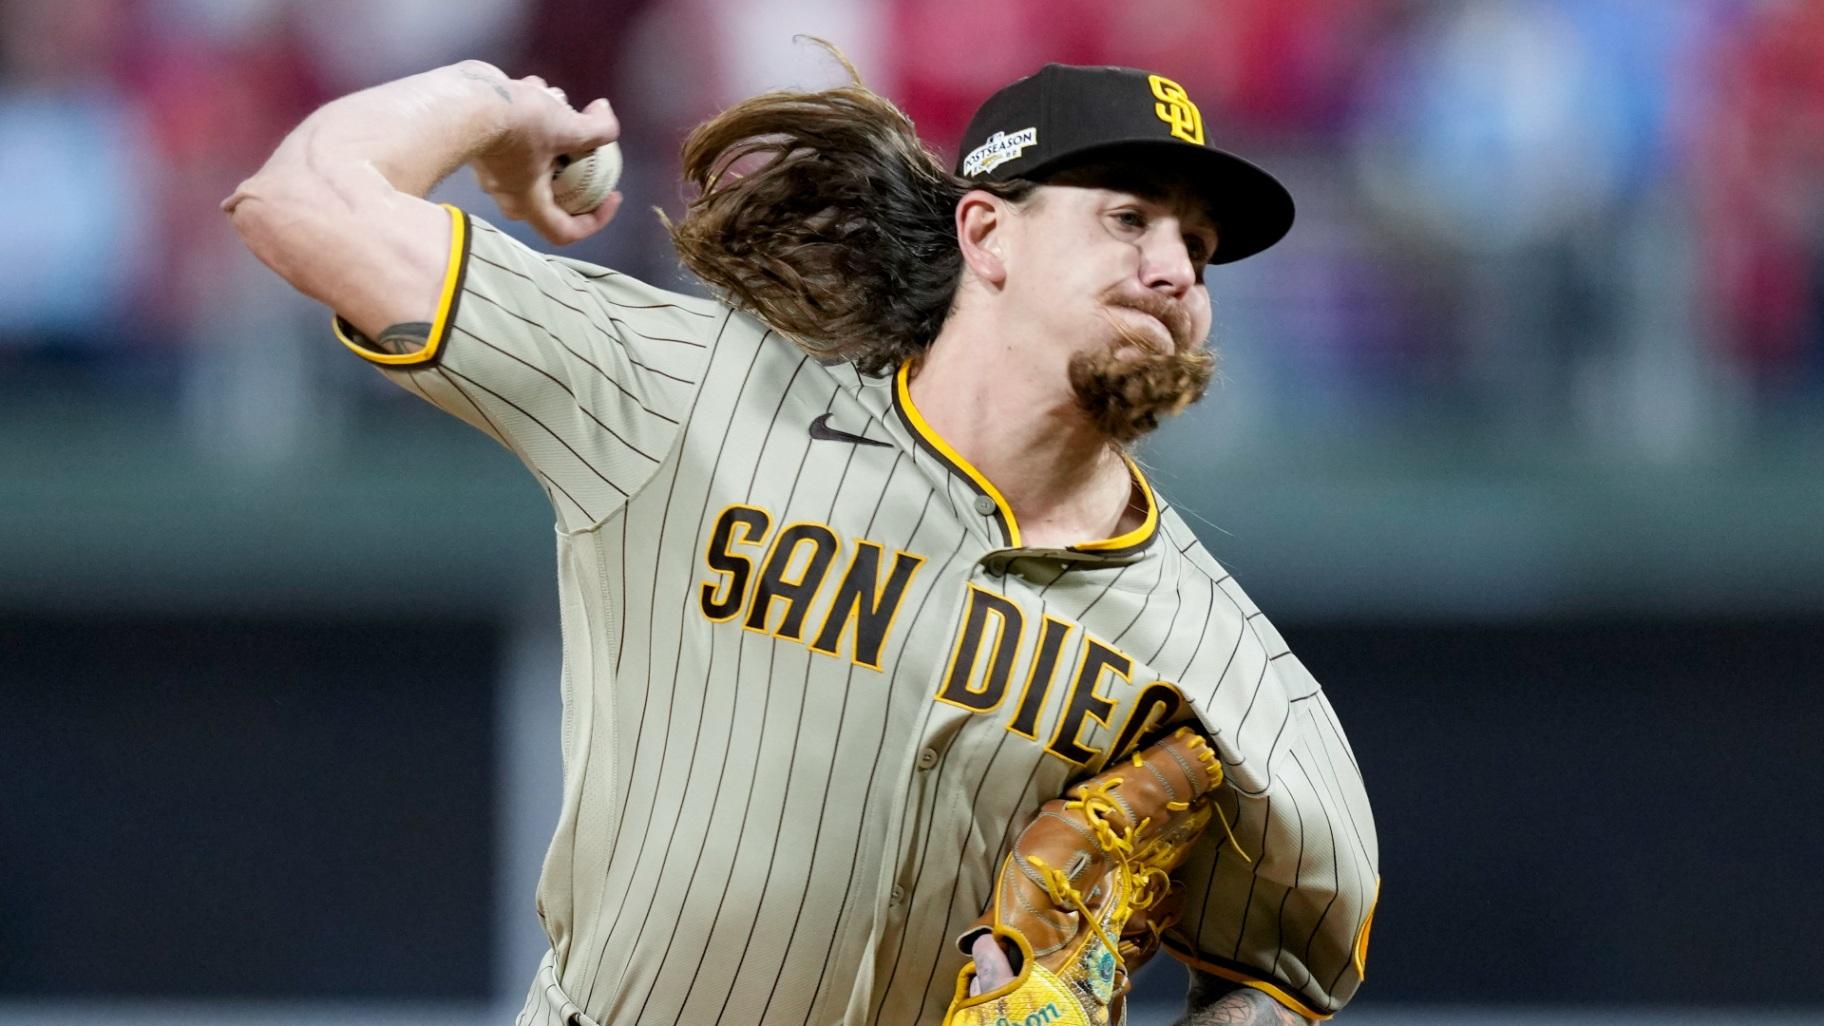 Mike Clevinger throws during the first inning in Game 4 of the baseball NL Championship Series between the San Diego Padres and the Philadelphia Phillies on Oct. 22, 2022, in Philadelphia. (AP Photo / Matt Slocum, File)